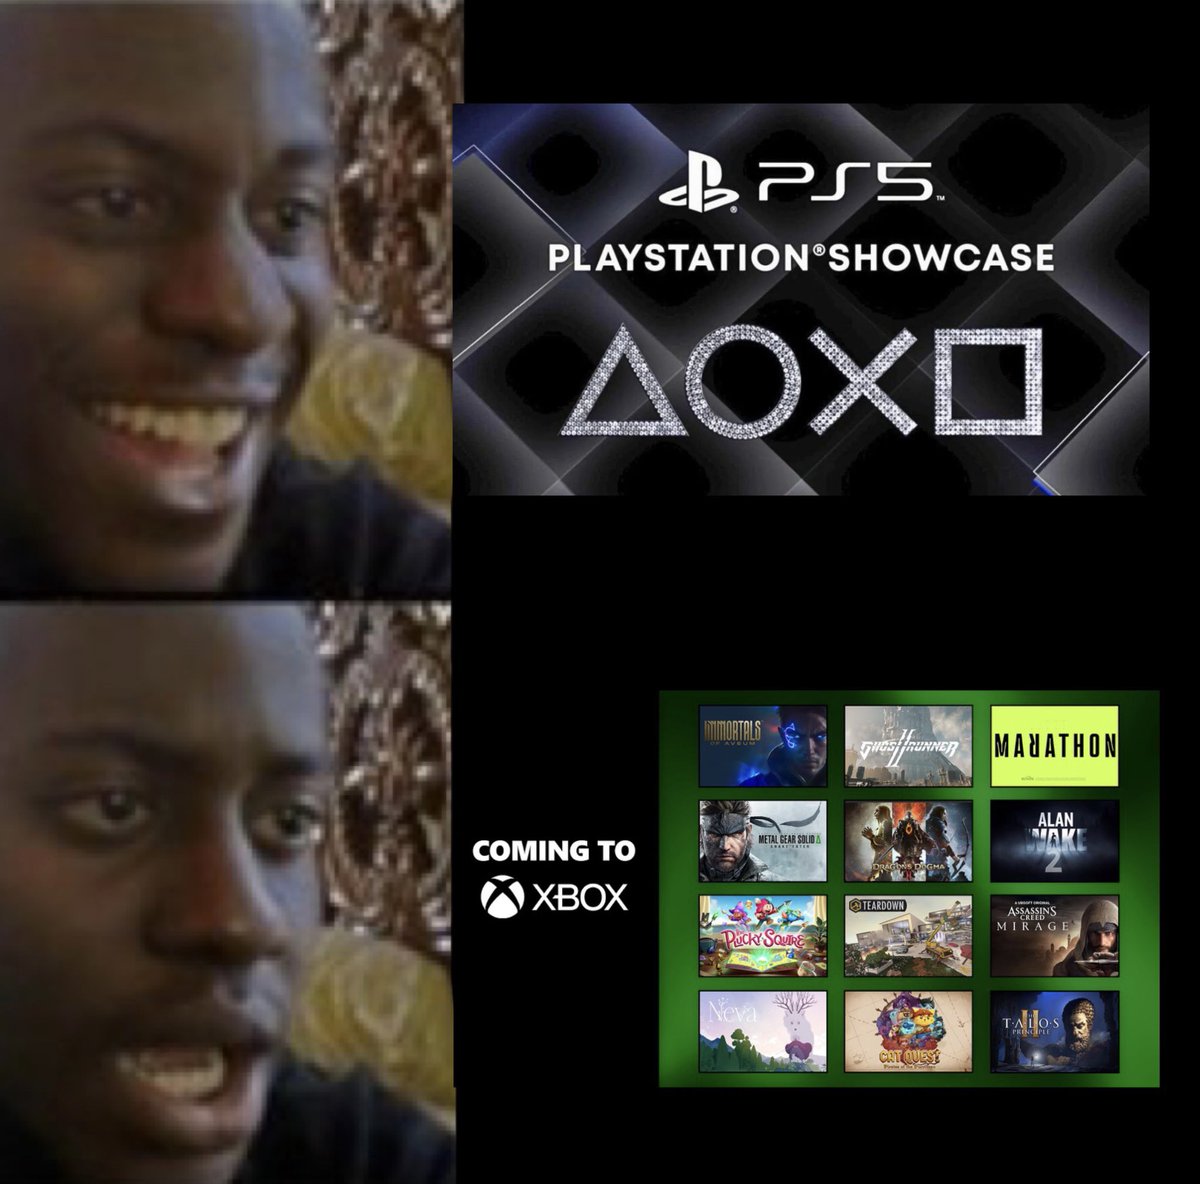 So, how was that PlayStation Showcase?

#PlayStationShow 
#Xbox